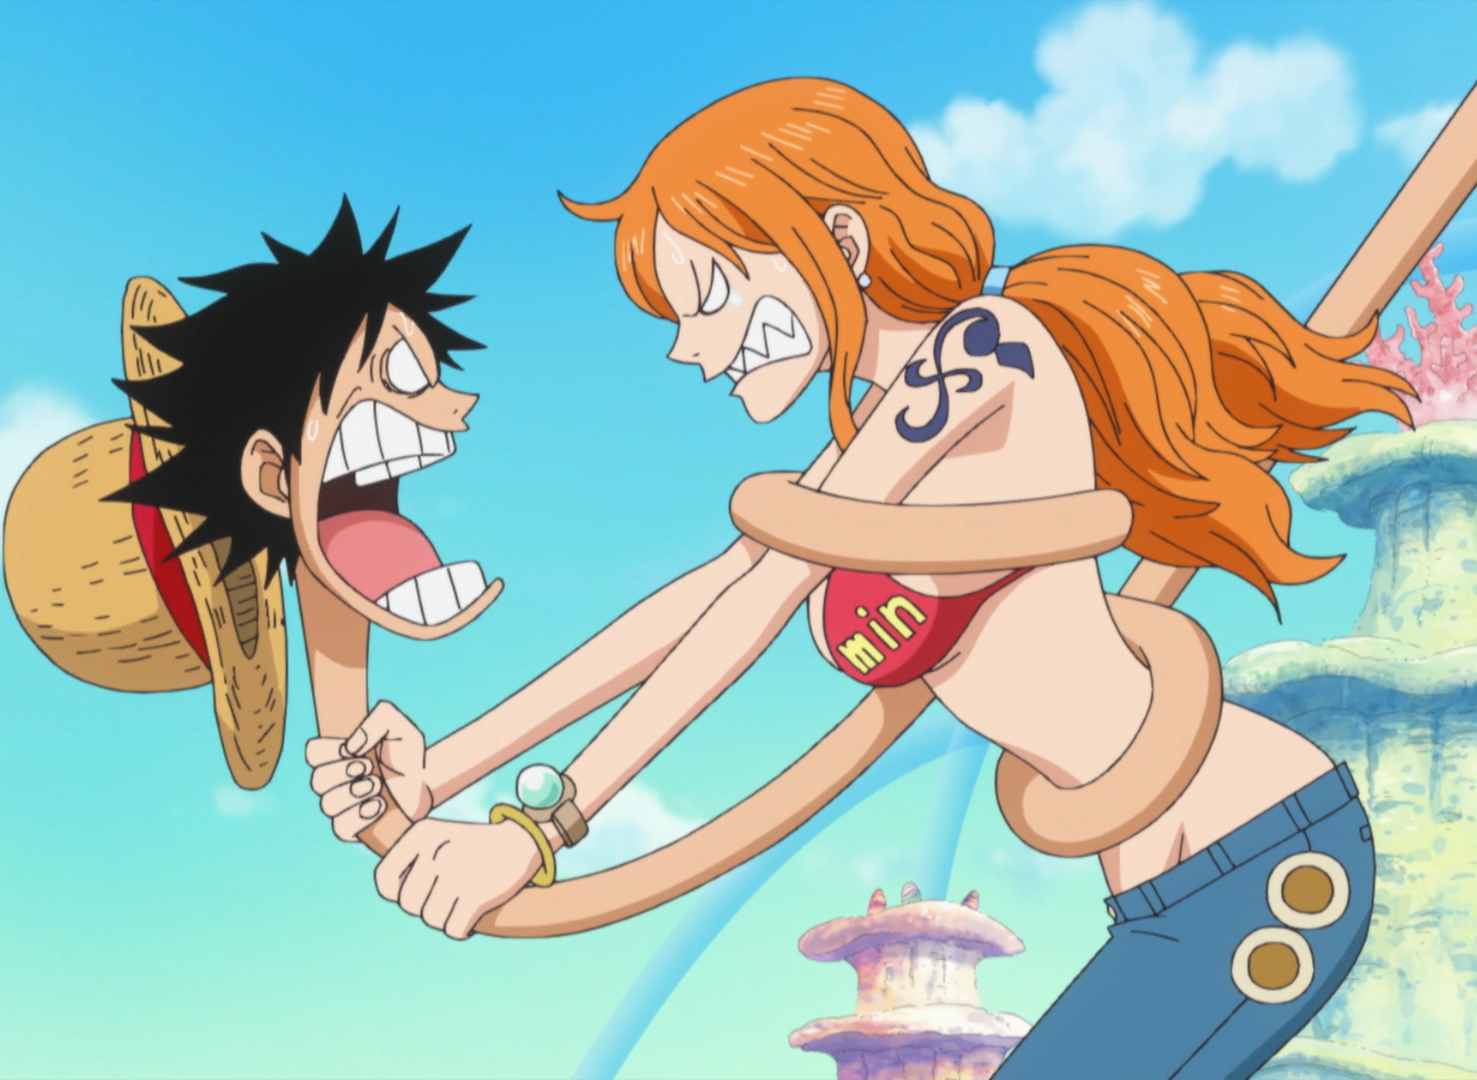 Nami Personality And Relationships The One Piece Wiki Manga Anime